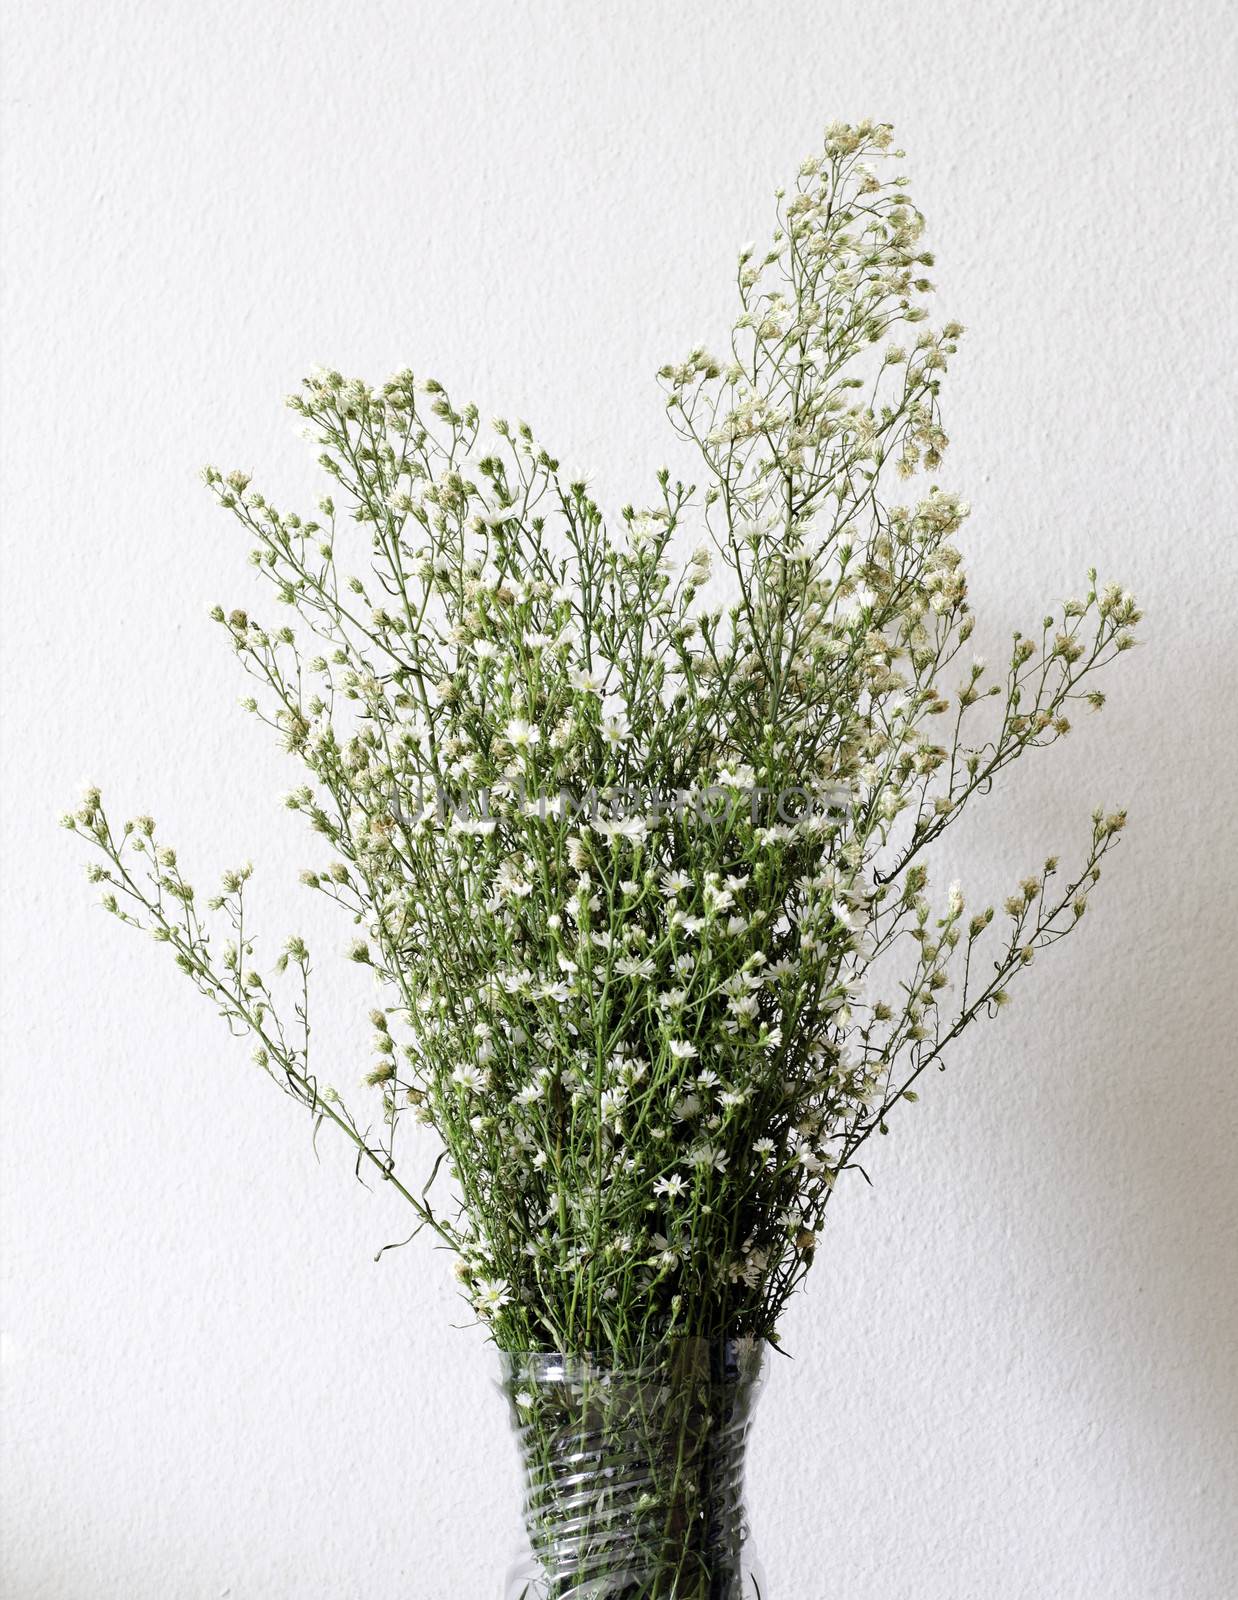 Dried bouquet of white flowers in vase on white background 